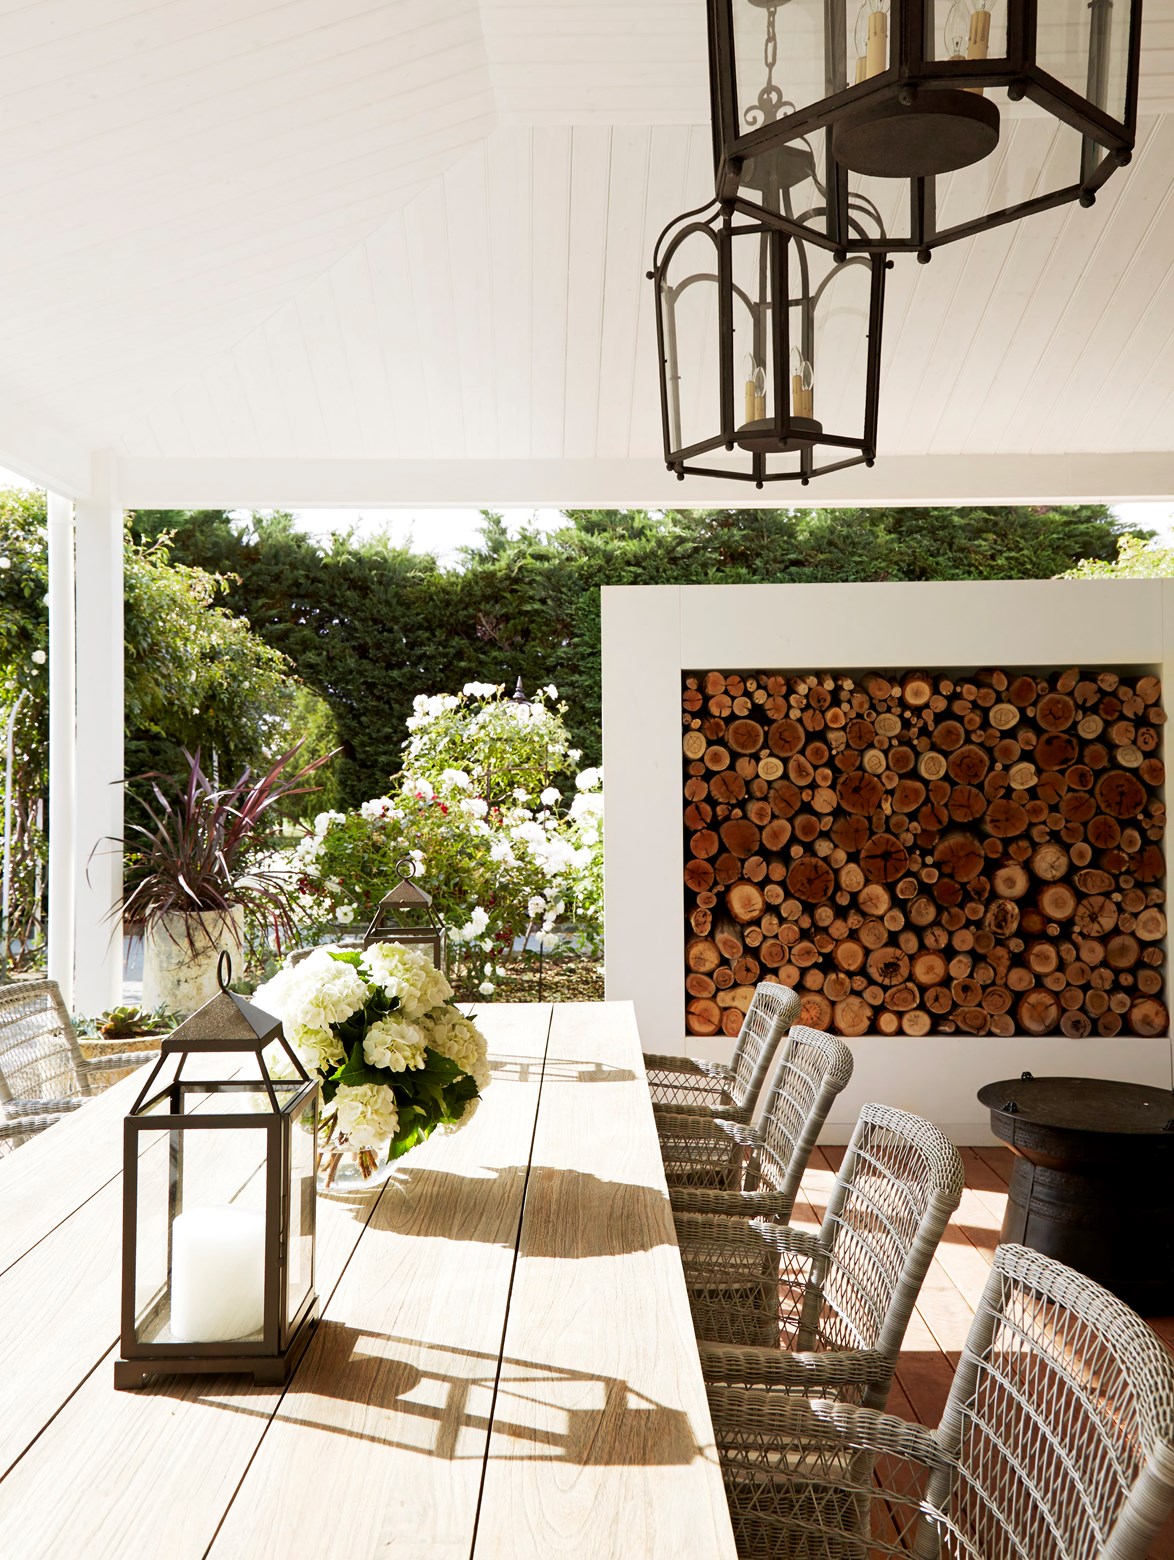 Striking the right balance between sunshine and shade is important when designing an outdoor entertaining space. *Photo: Anson Smart*